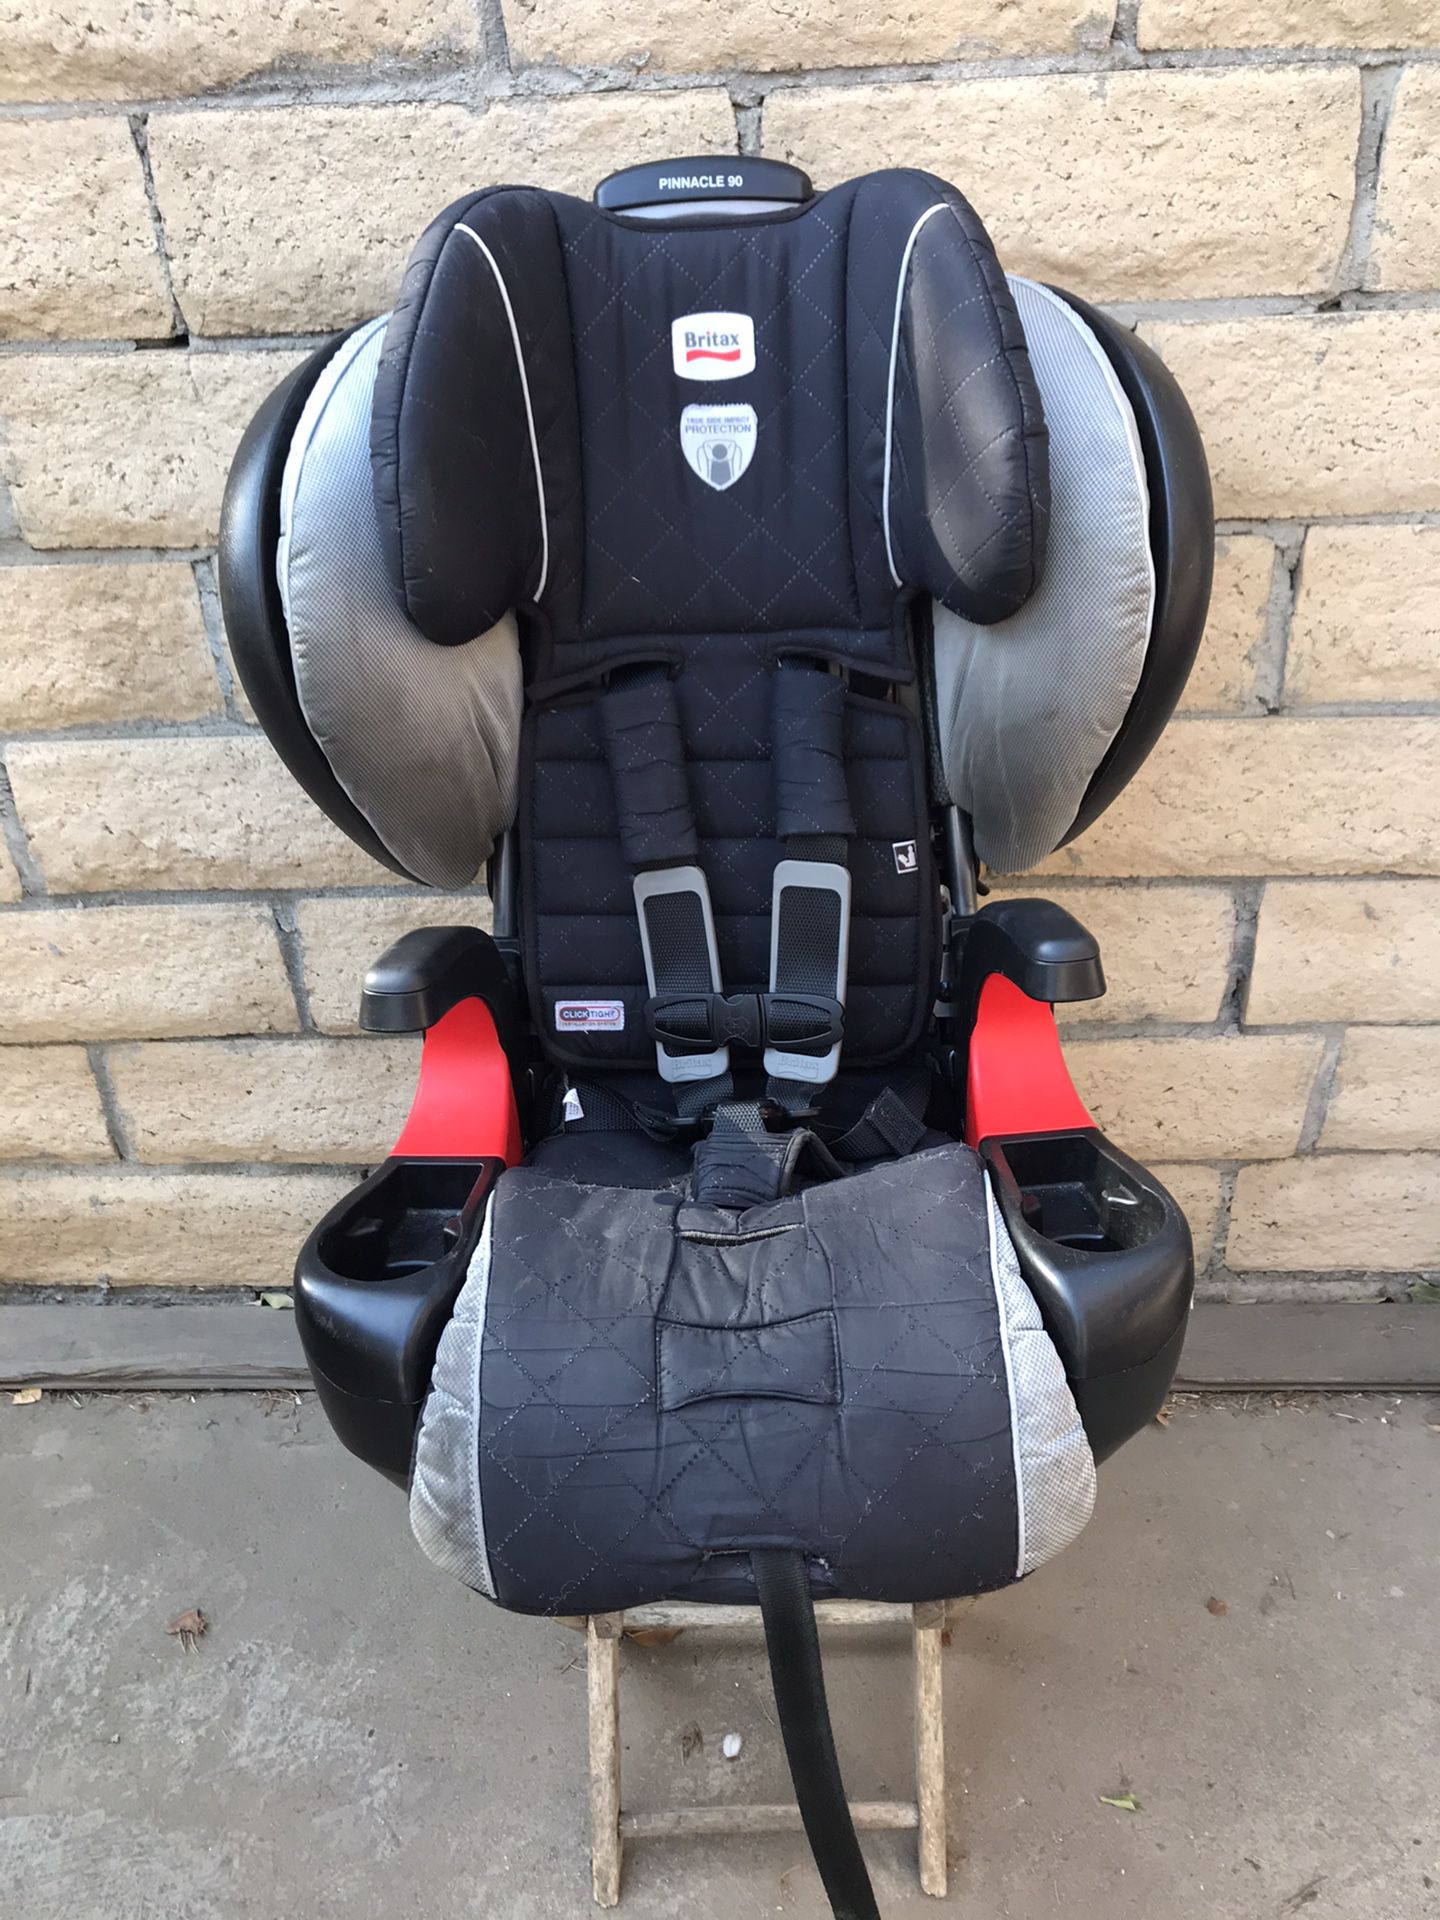 Britax grow With You Booster Car Seat